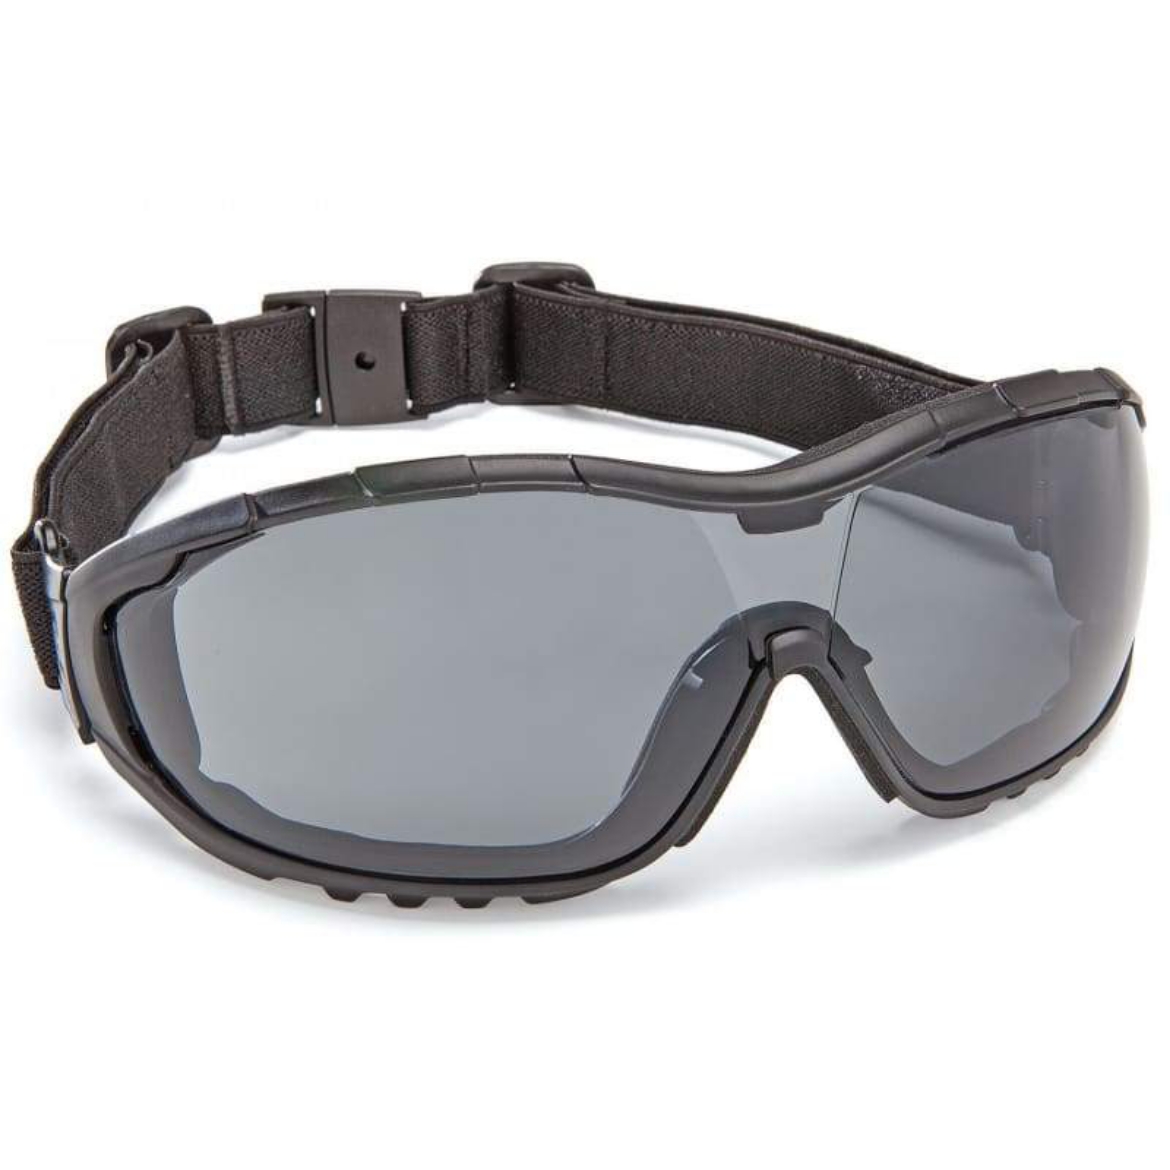 Picture of Force360 Oil & Gas Smoke Lens Safety Glasses (with strap)